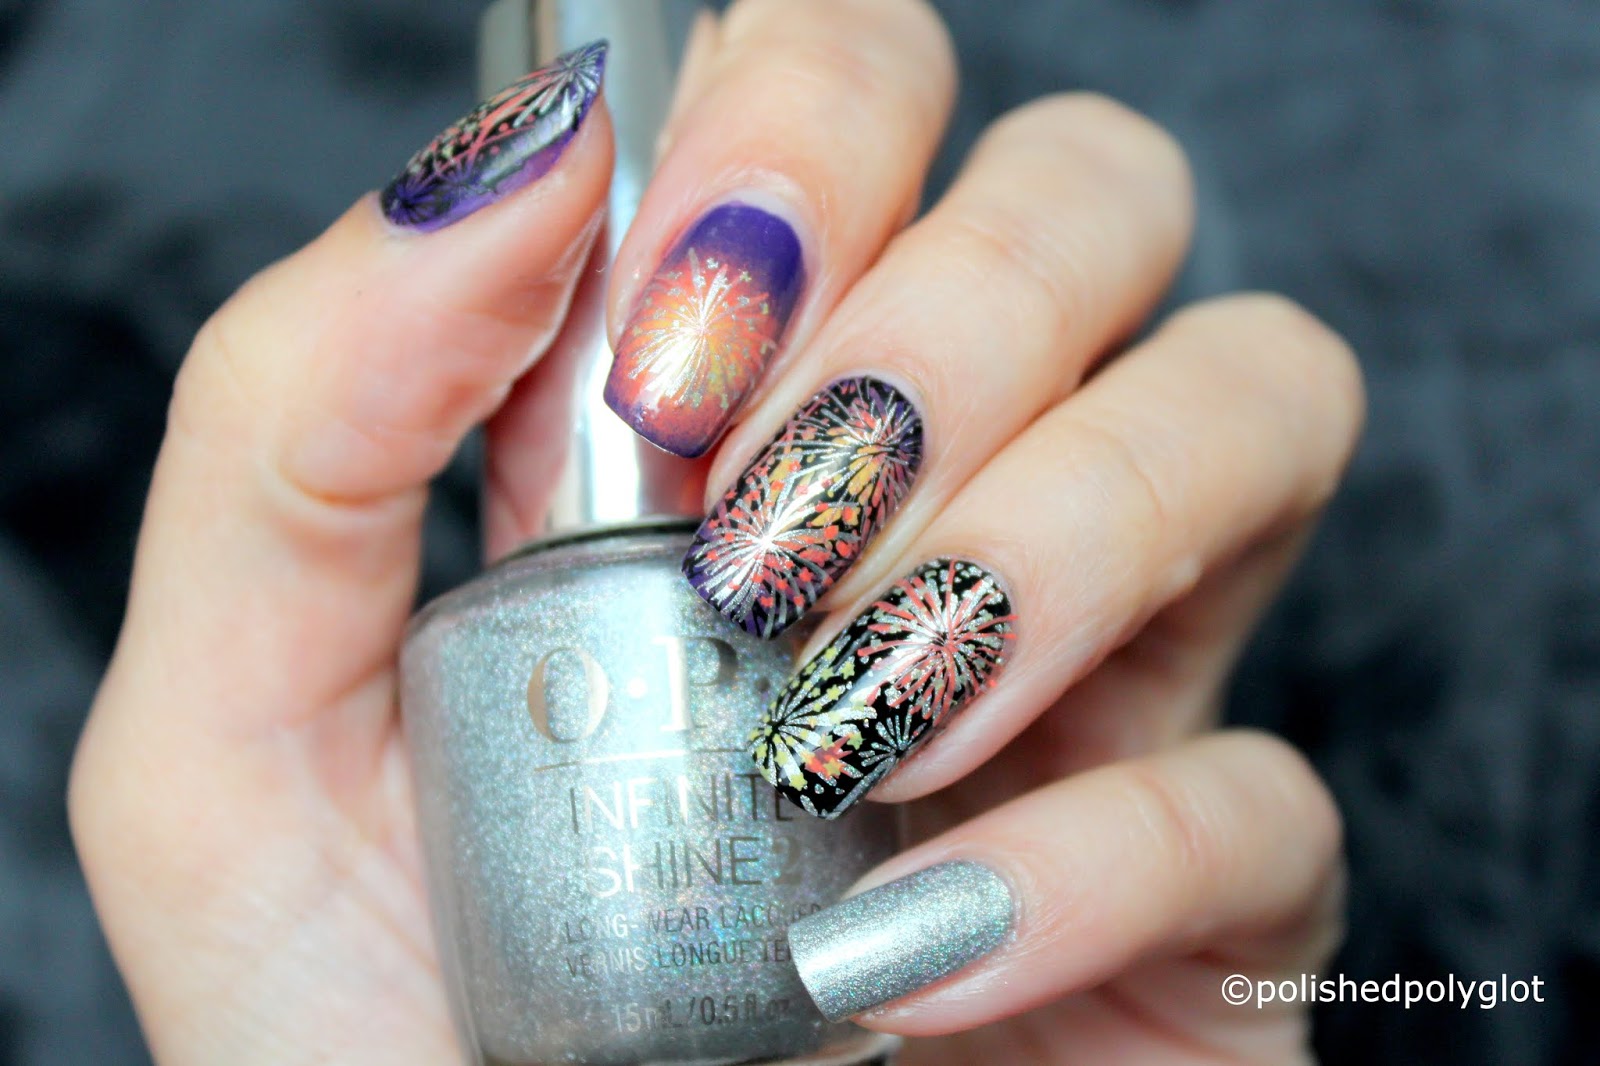 6. "Fireworks Nail Stamping Plate Designs" - wide 10